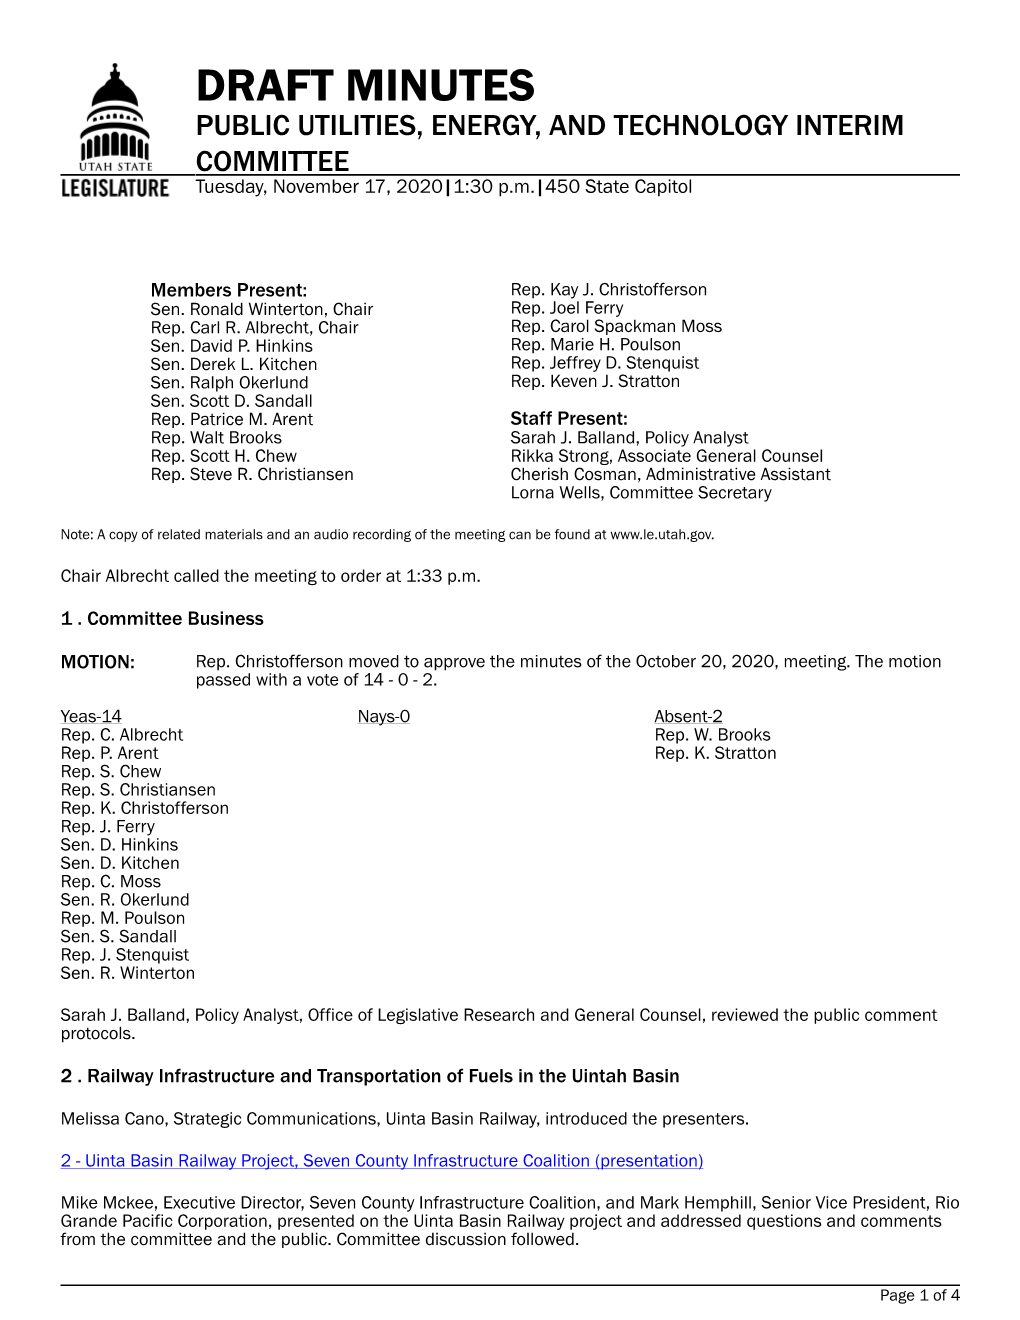 DRAFT MINUTES PUBLIC UTILITIES, ENERGY, and TECHNOLOGY INTERIM COMMITTEE Tuesday, November 17, 2020|1:30 P.M.|450 State Capitol